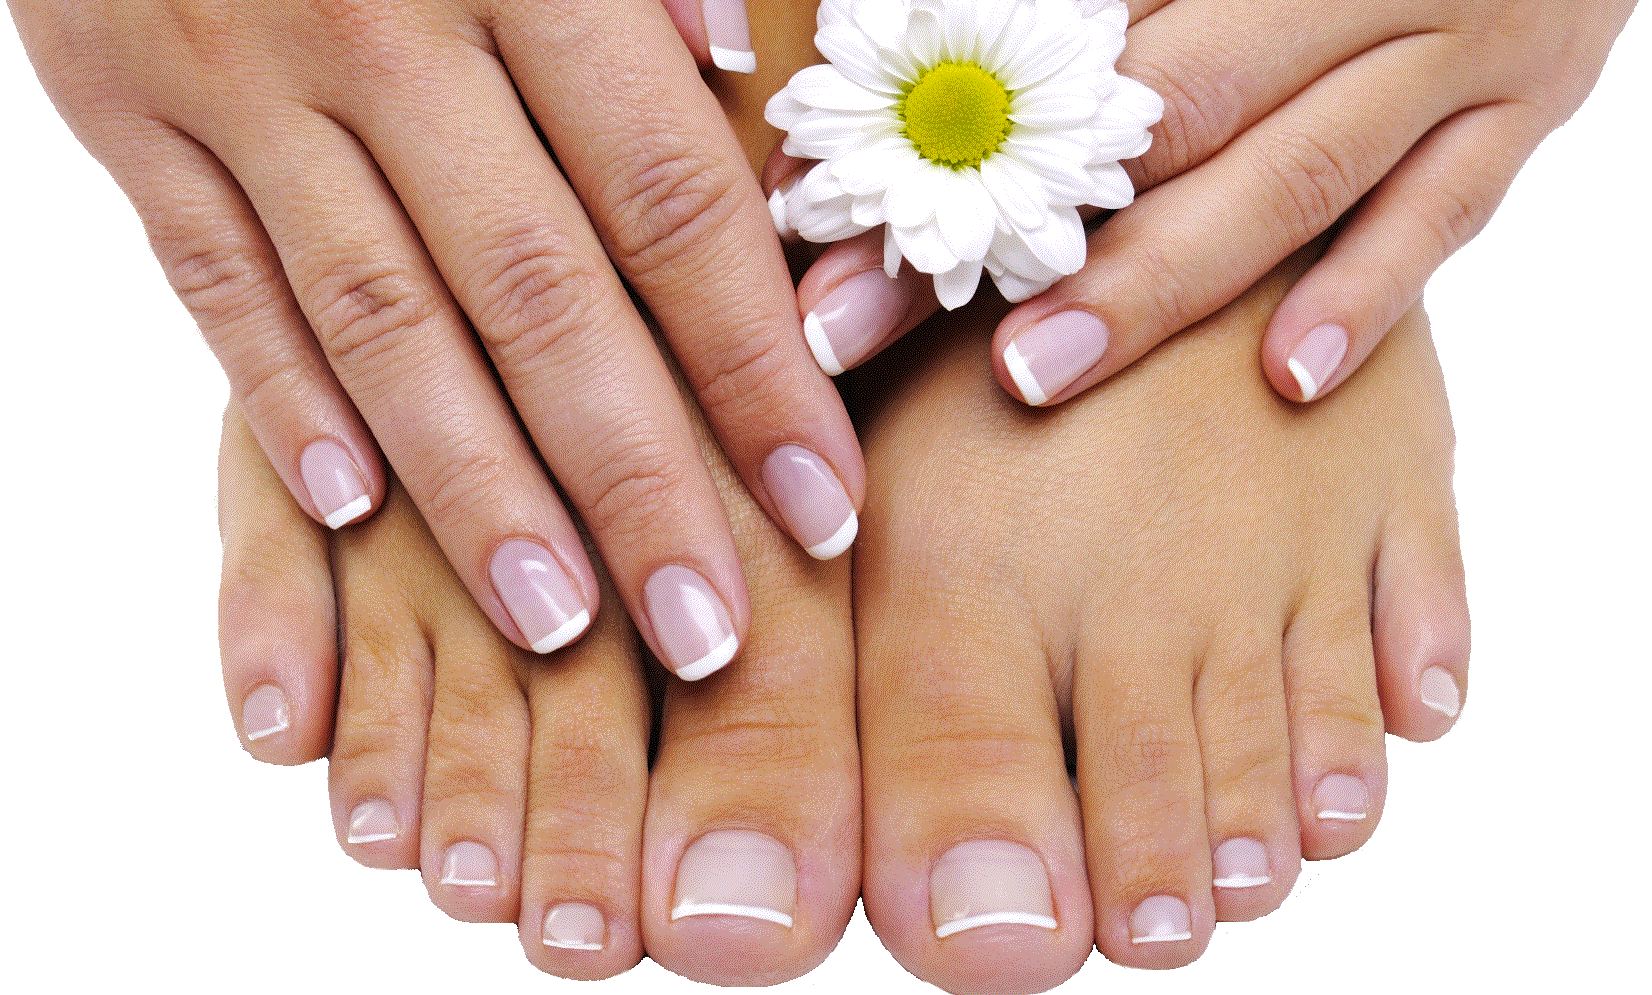 Kisspng Foot Pedicure Manicure Gel Nails Pedicure 5acb24a159b976 - Gel Nails And Toes (1652x995), Png Download